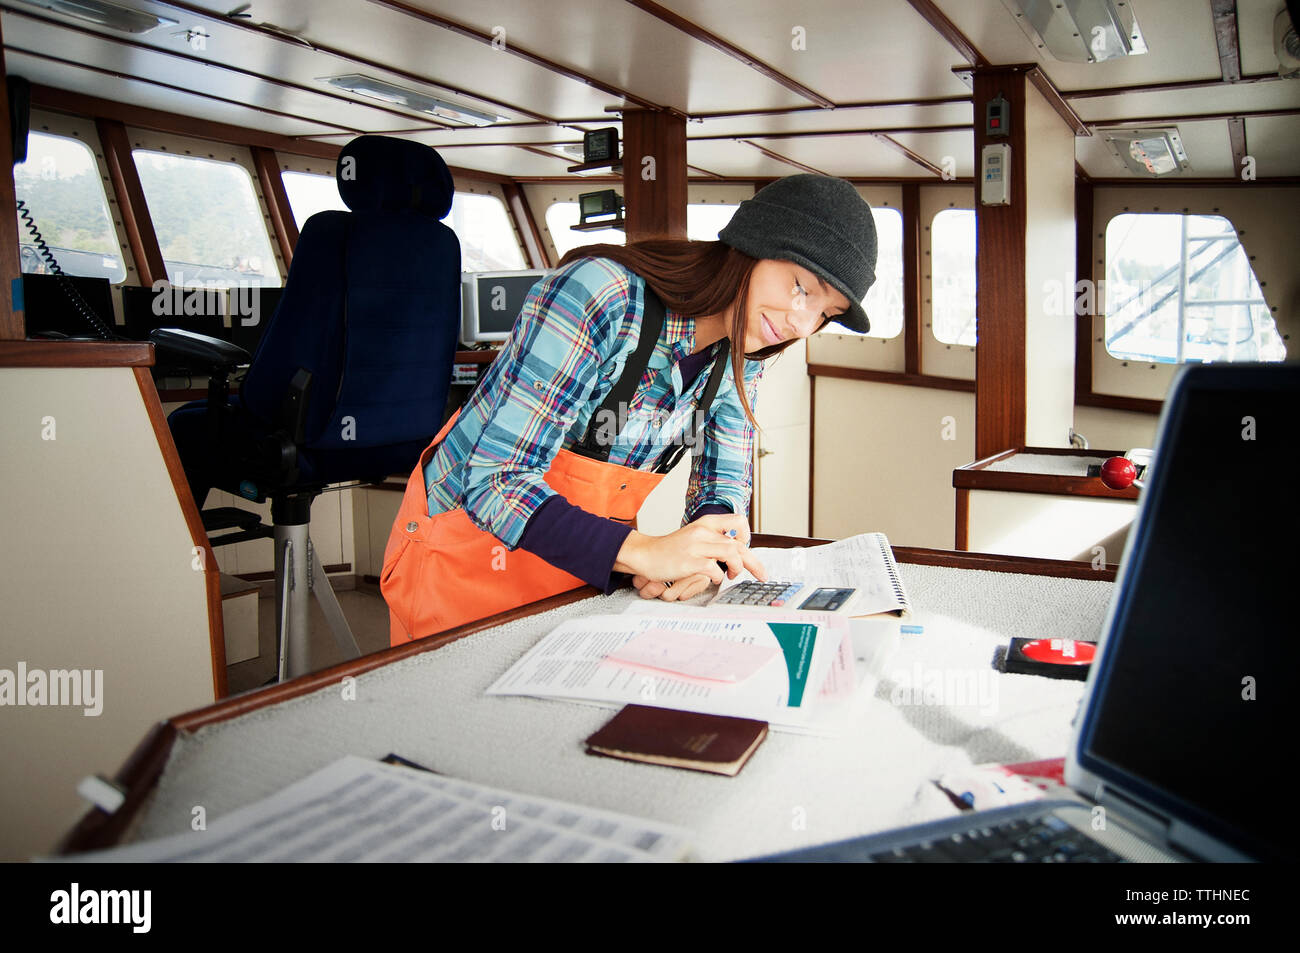 Woman using calculator and writing on documents in fishing boat Stock Photo